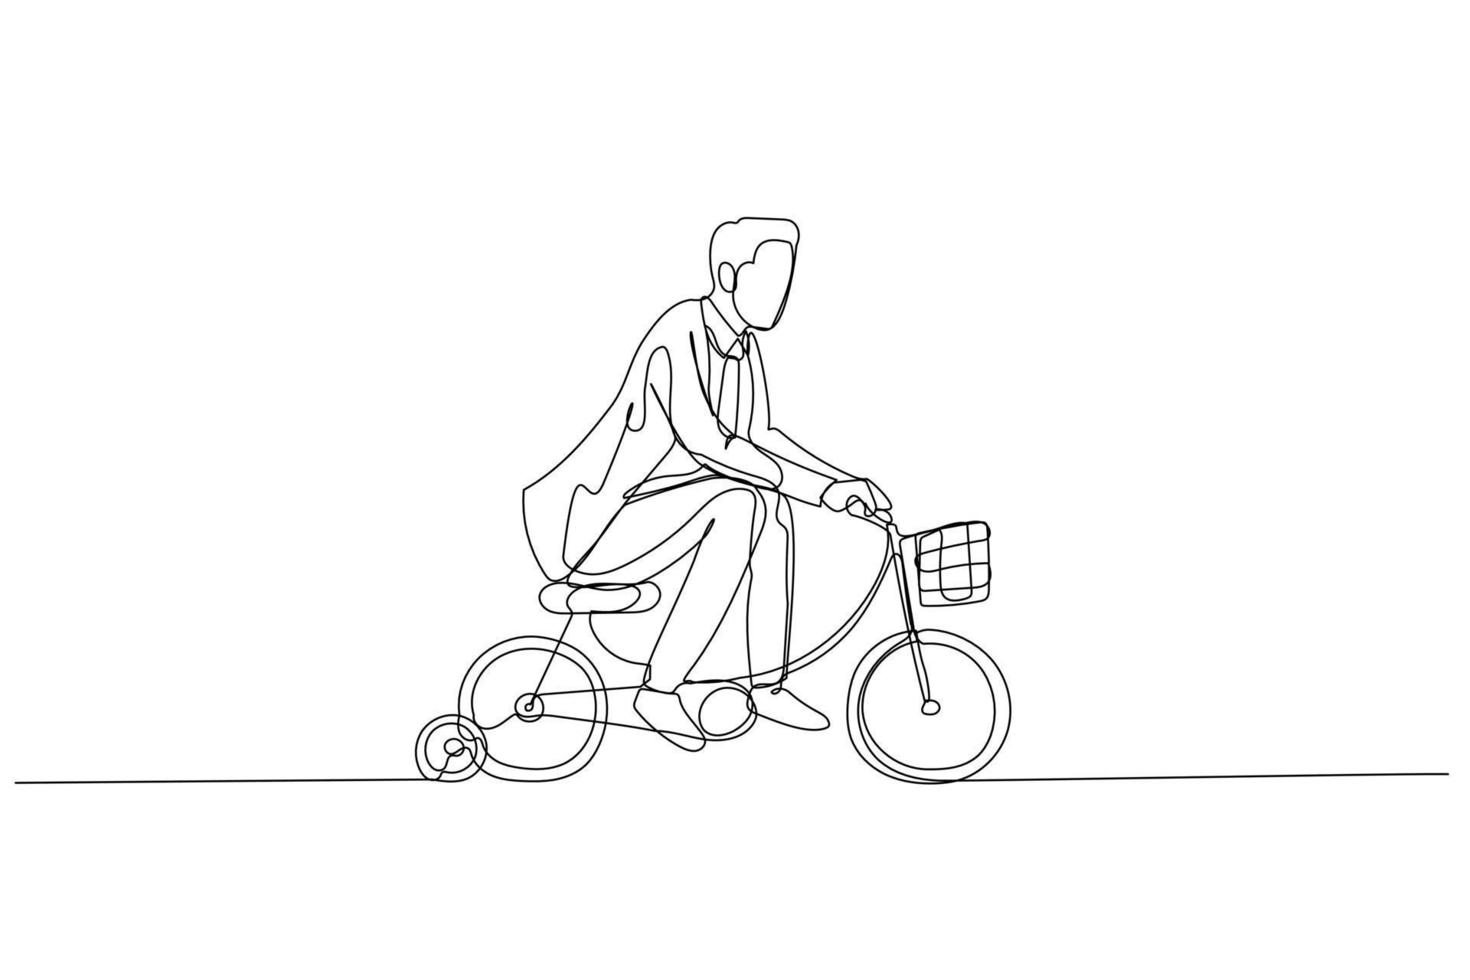 businessman practice riding child bicycle with training wheels concept of training practice for success. Single continuous line art style vector